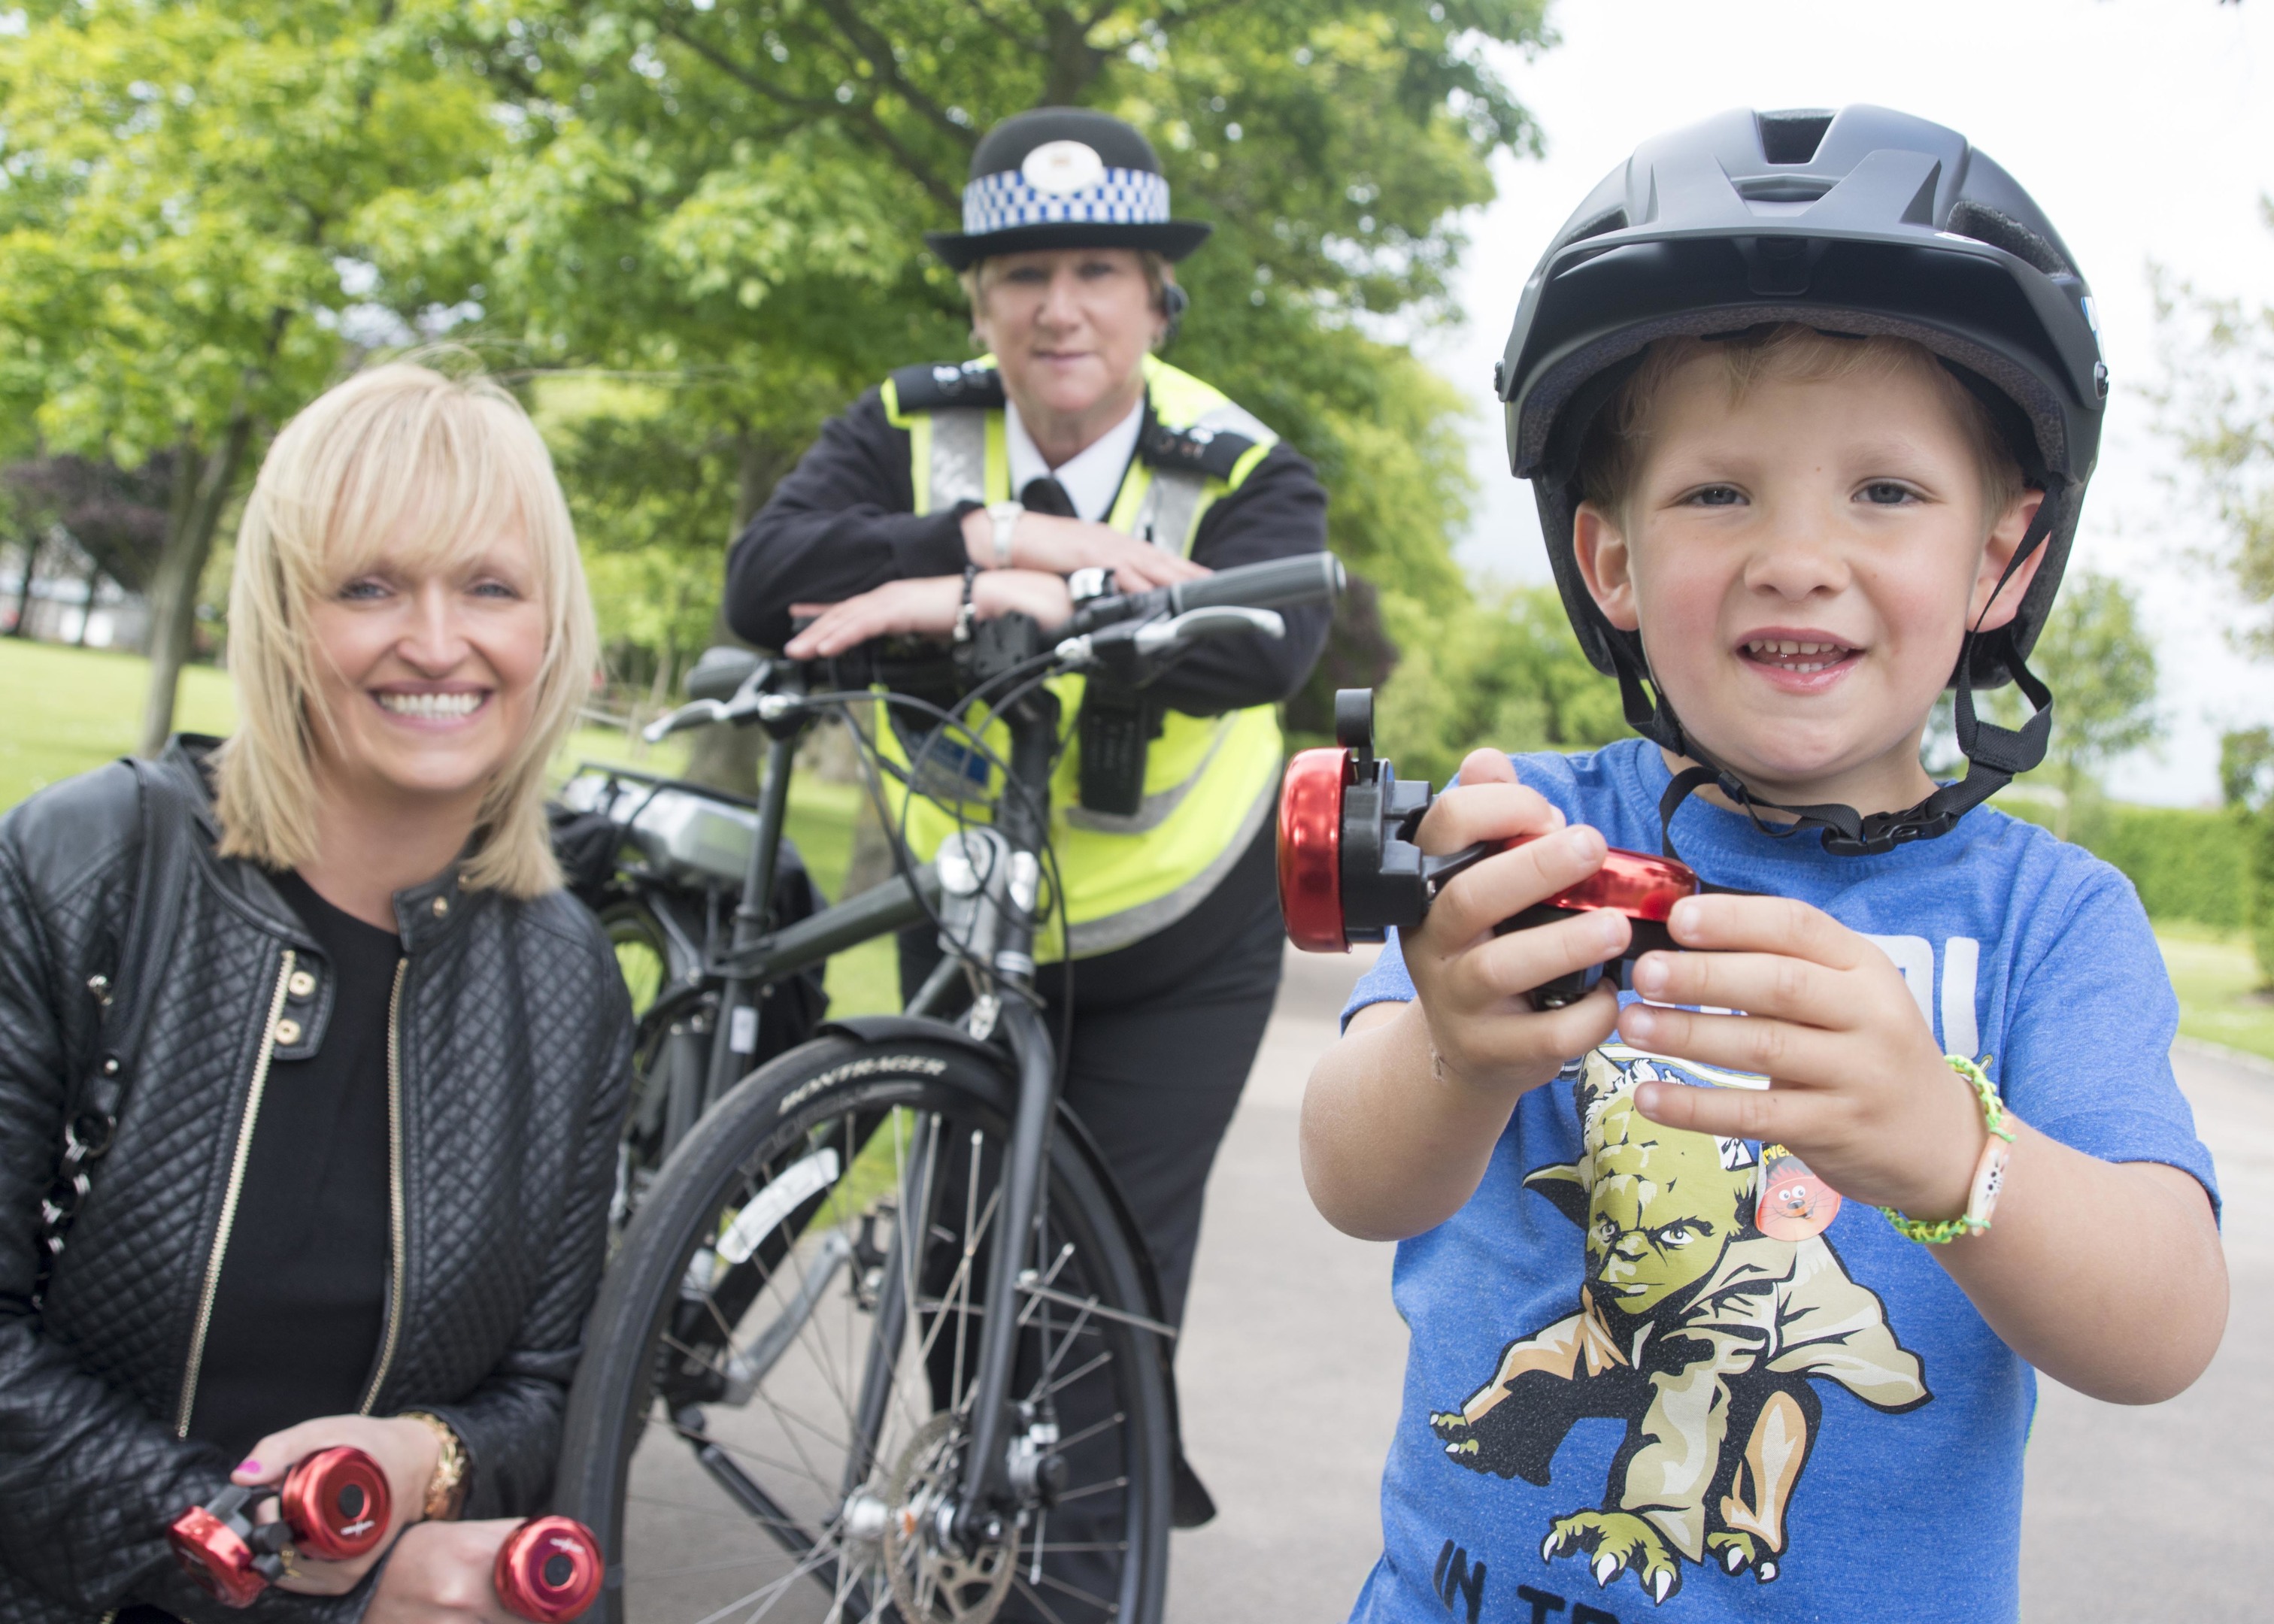 Bike bells were given out as part of the city council's Active Travel Action Plan